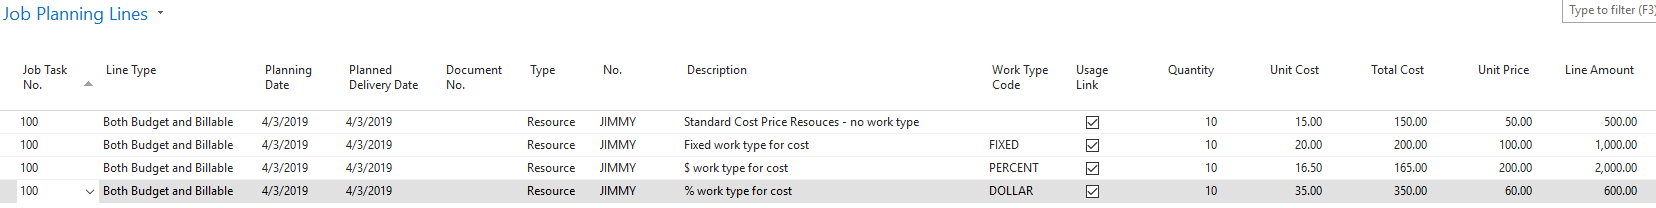 Figure 4 – Unit Costs and Unit Prices in the setup of Job Planning Lines in Microsoft Dynamics NAV or Business Central